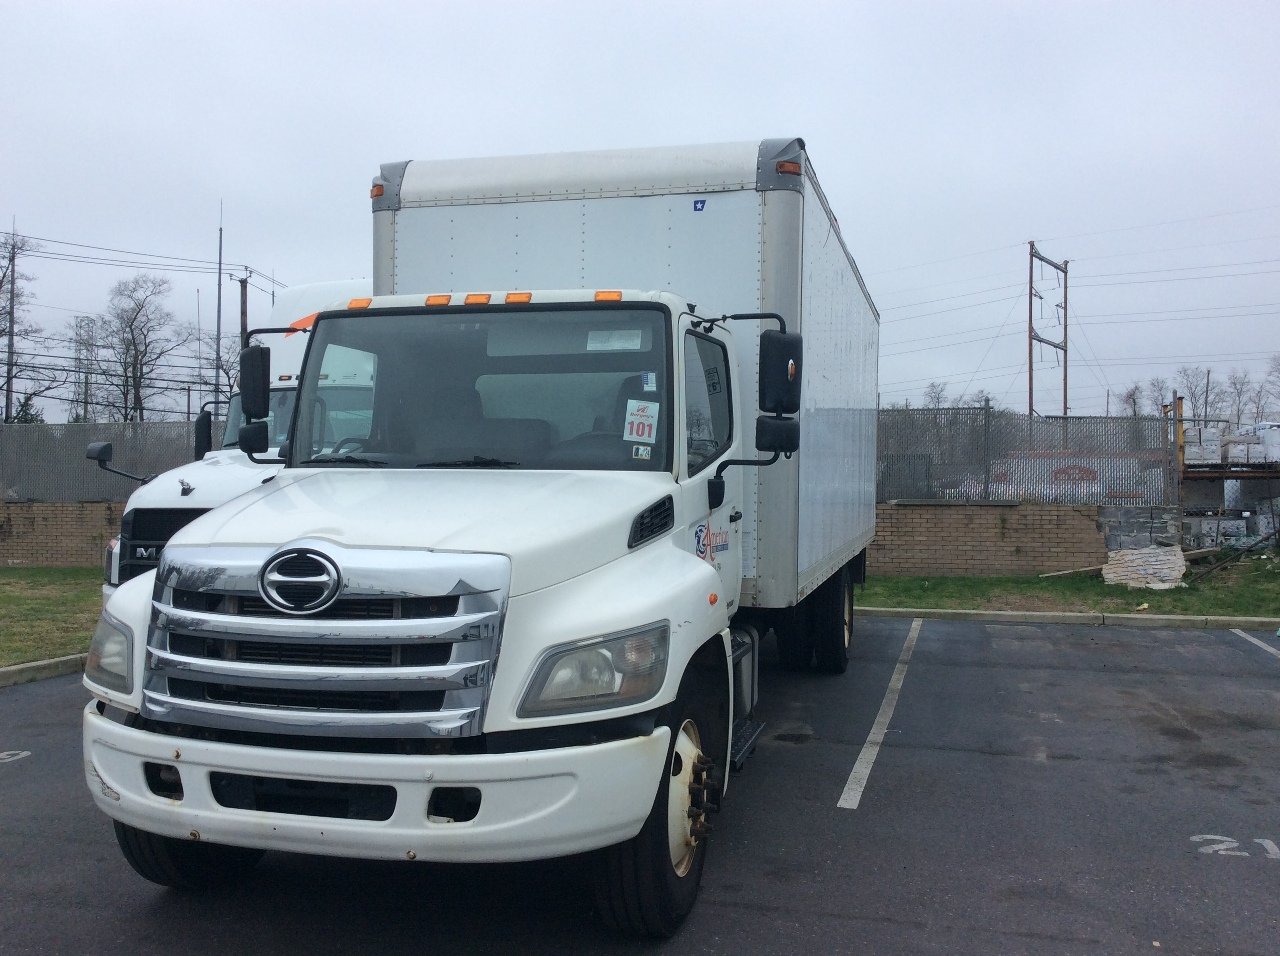 Used Truck Inventory - 1001821 01 2 - 112